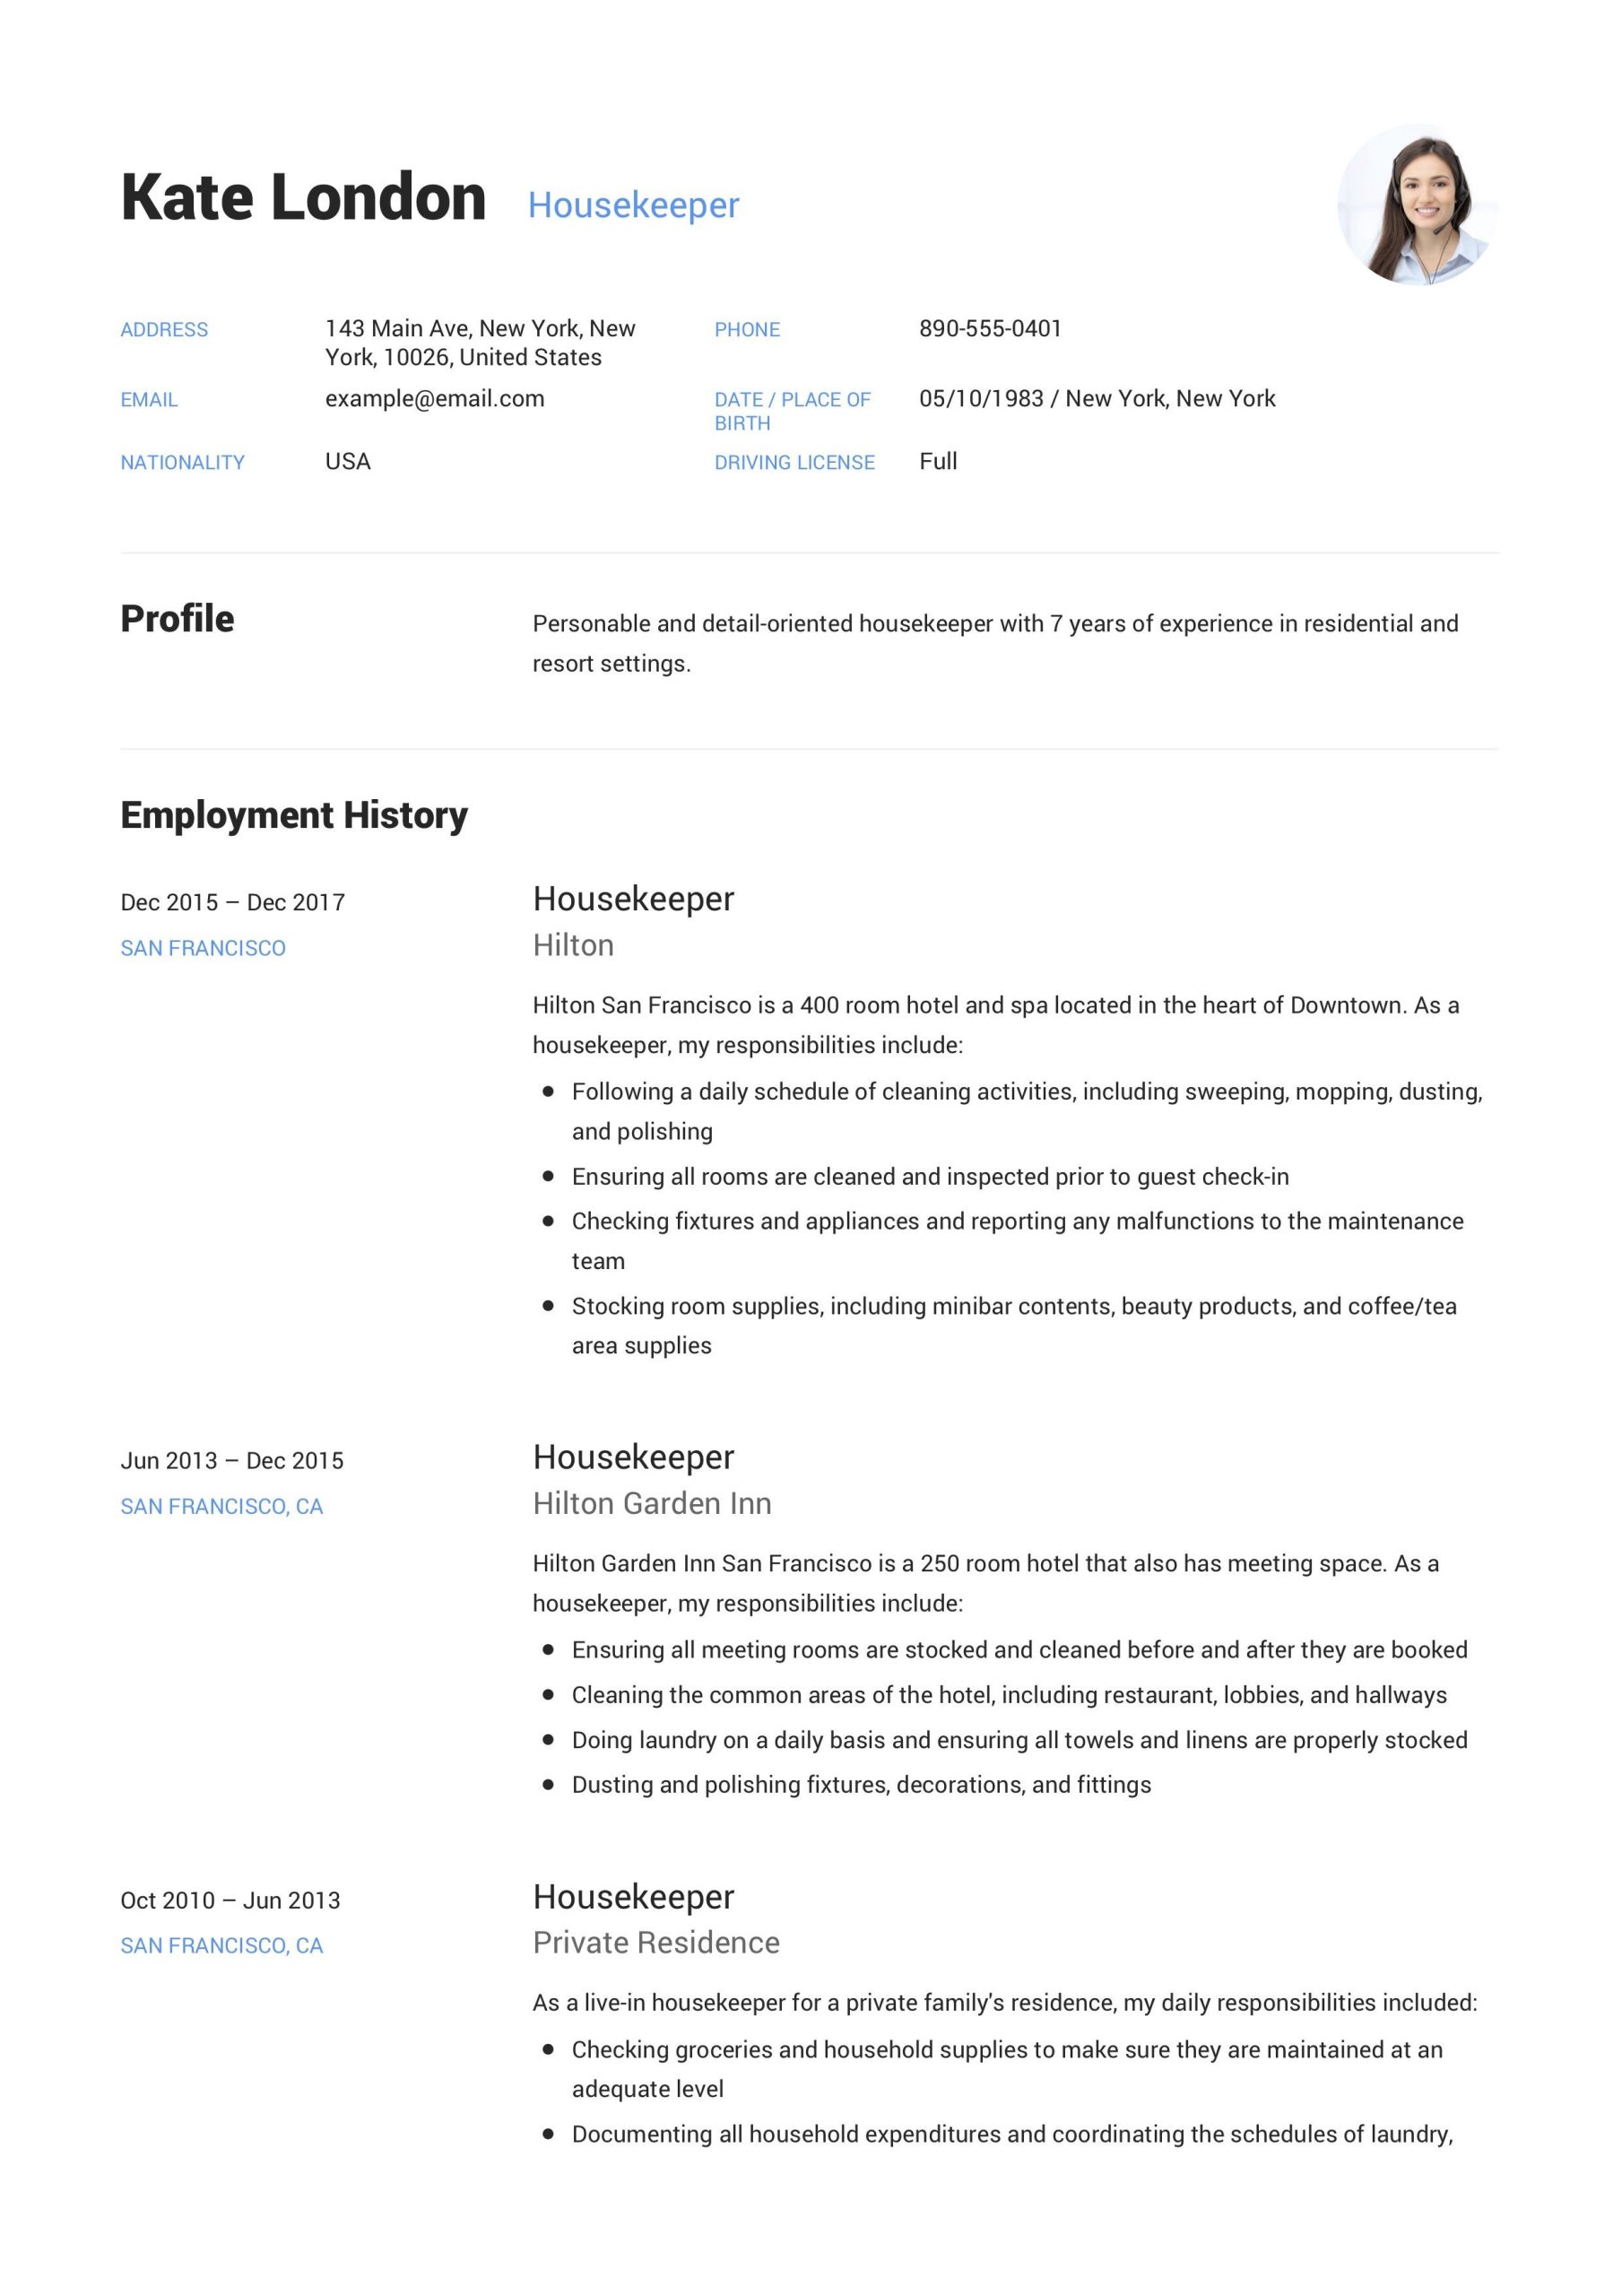 Sample Resume for Housekeeping with No Experience Housekeeper Resume Sample Resume Guide, Resume Skills, Resume …